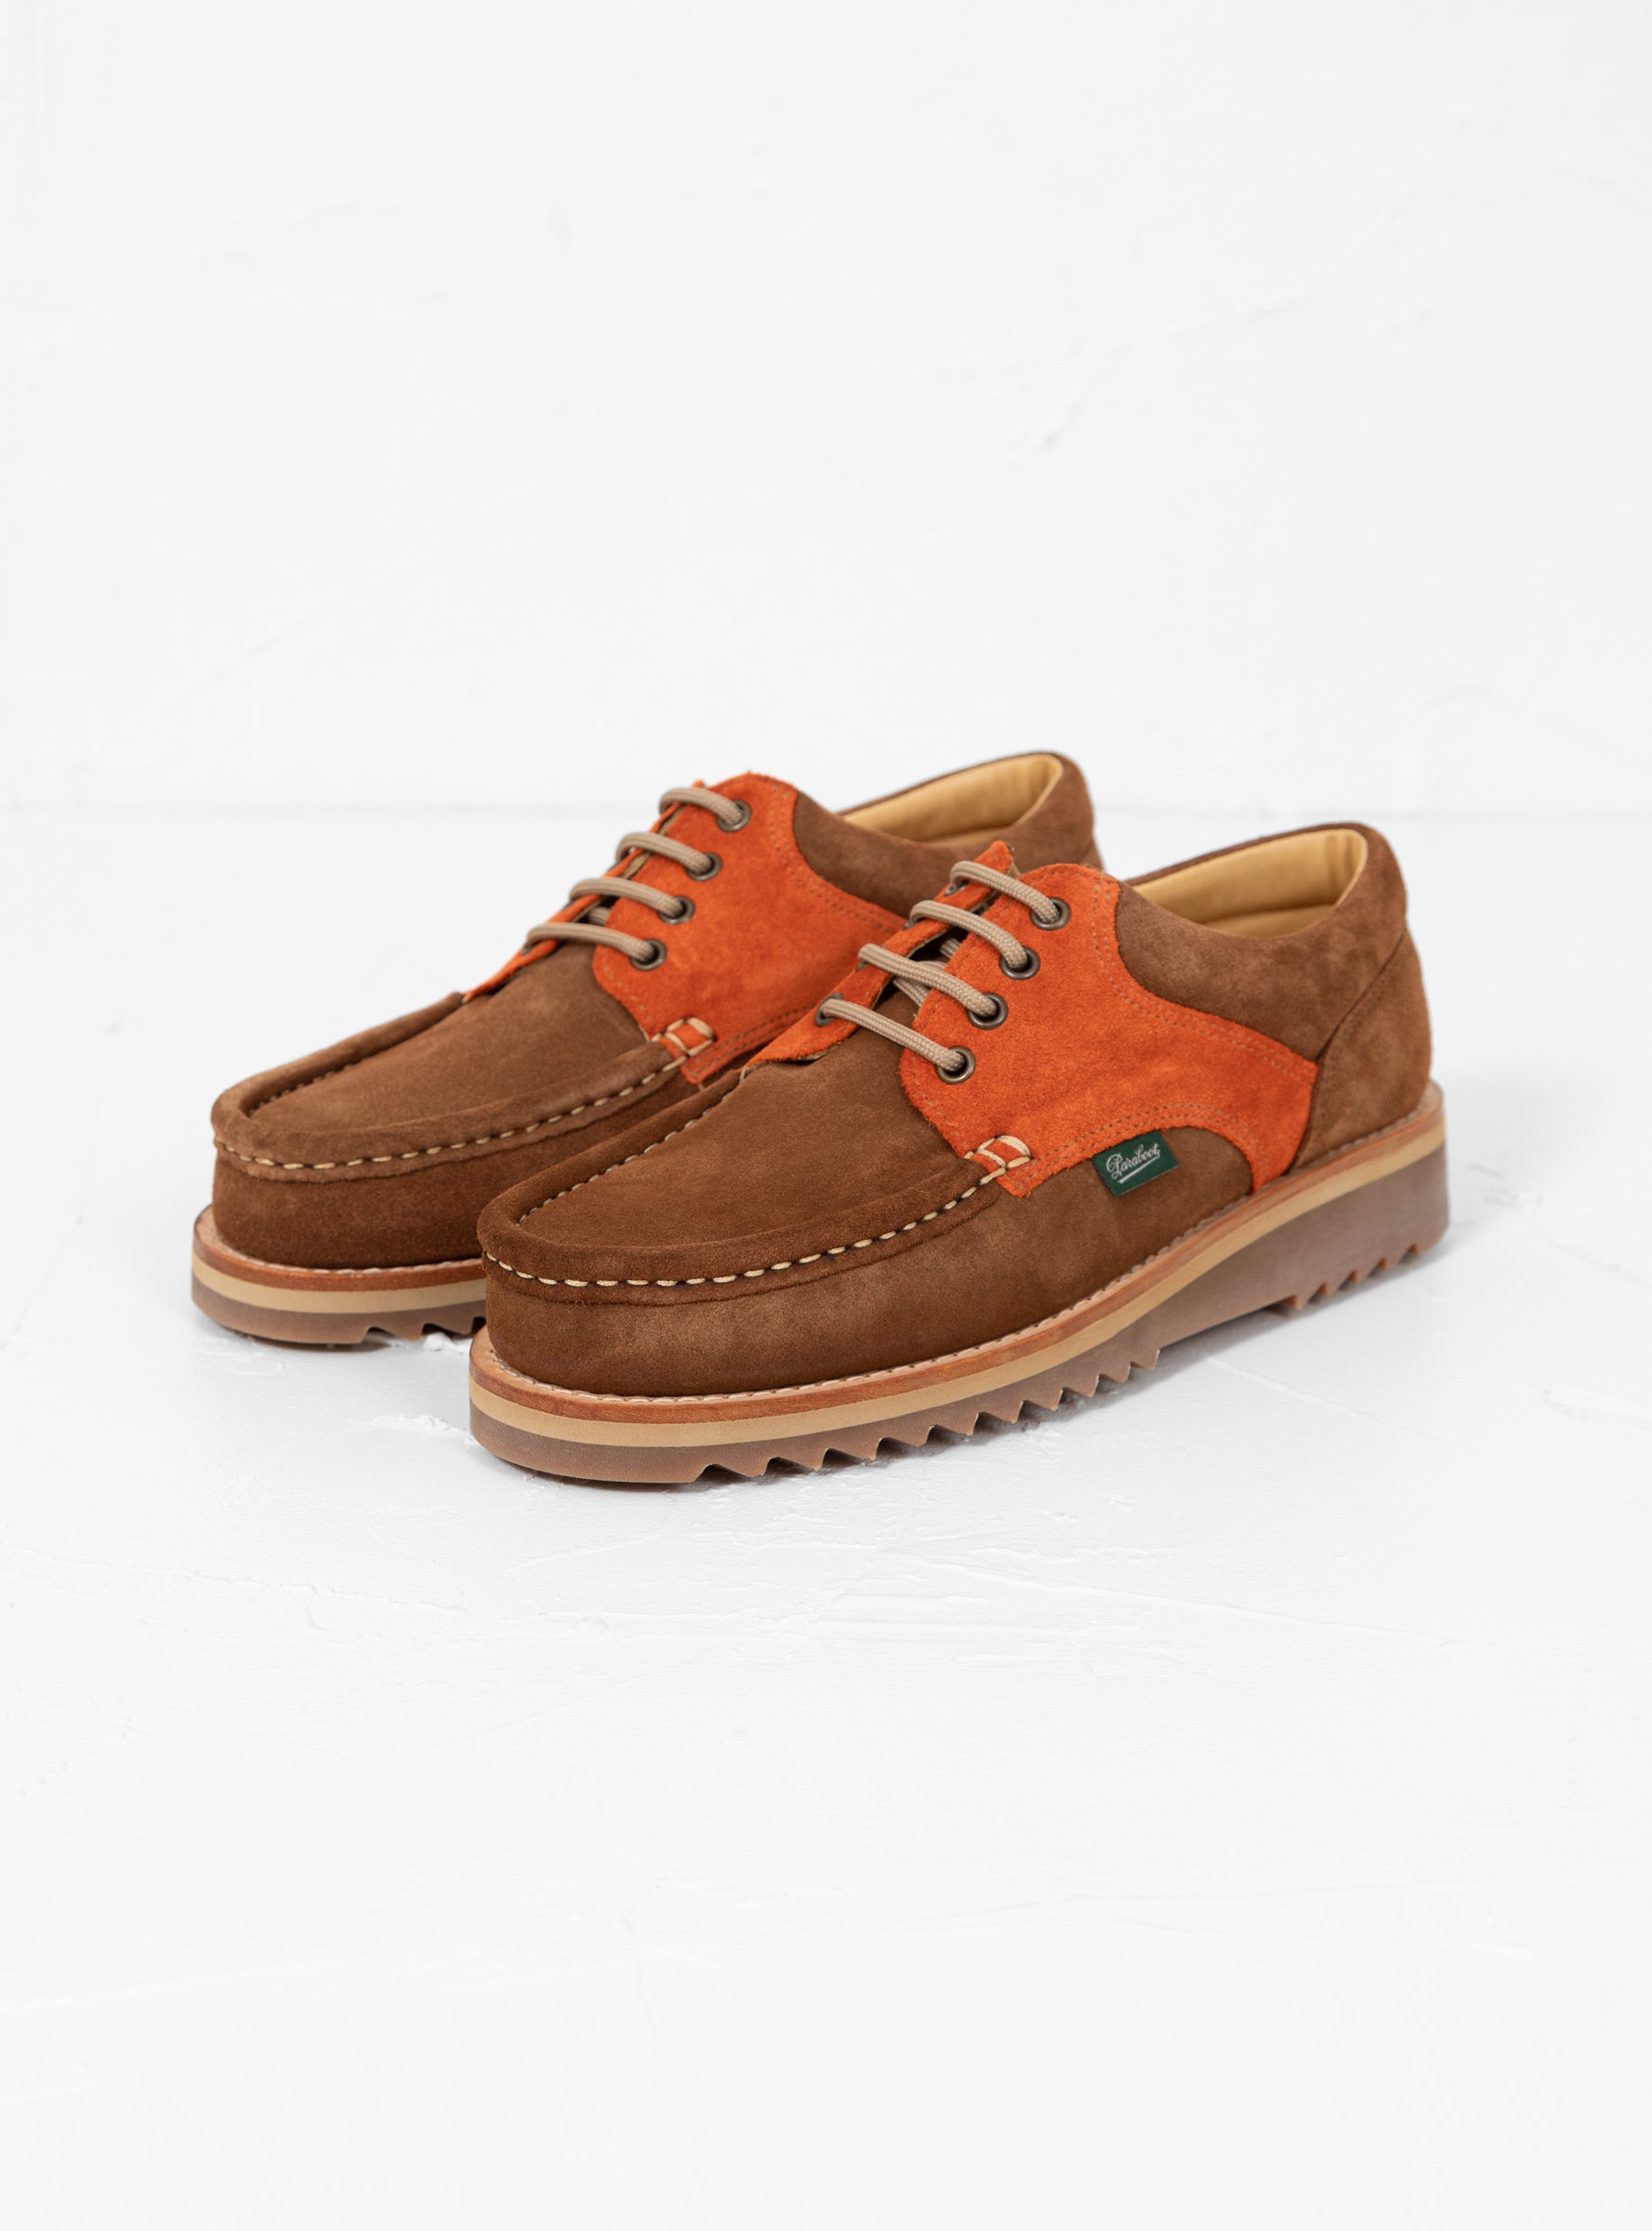 Paraboot Paraboot Thiers Suede Shoes Sand & Orange - Size: UK 11